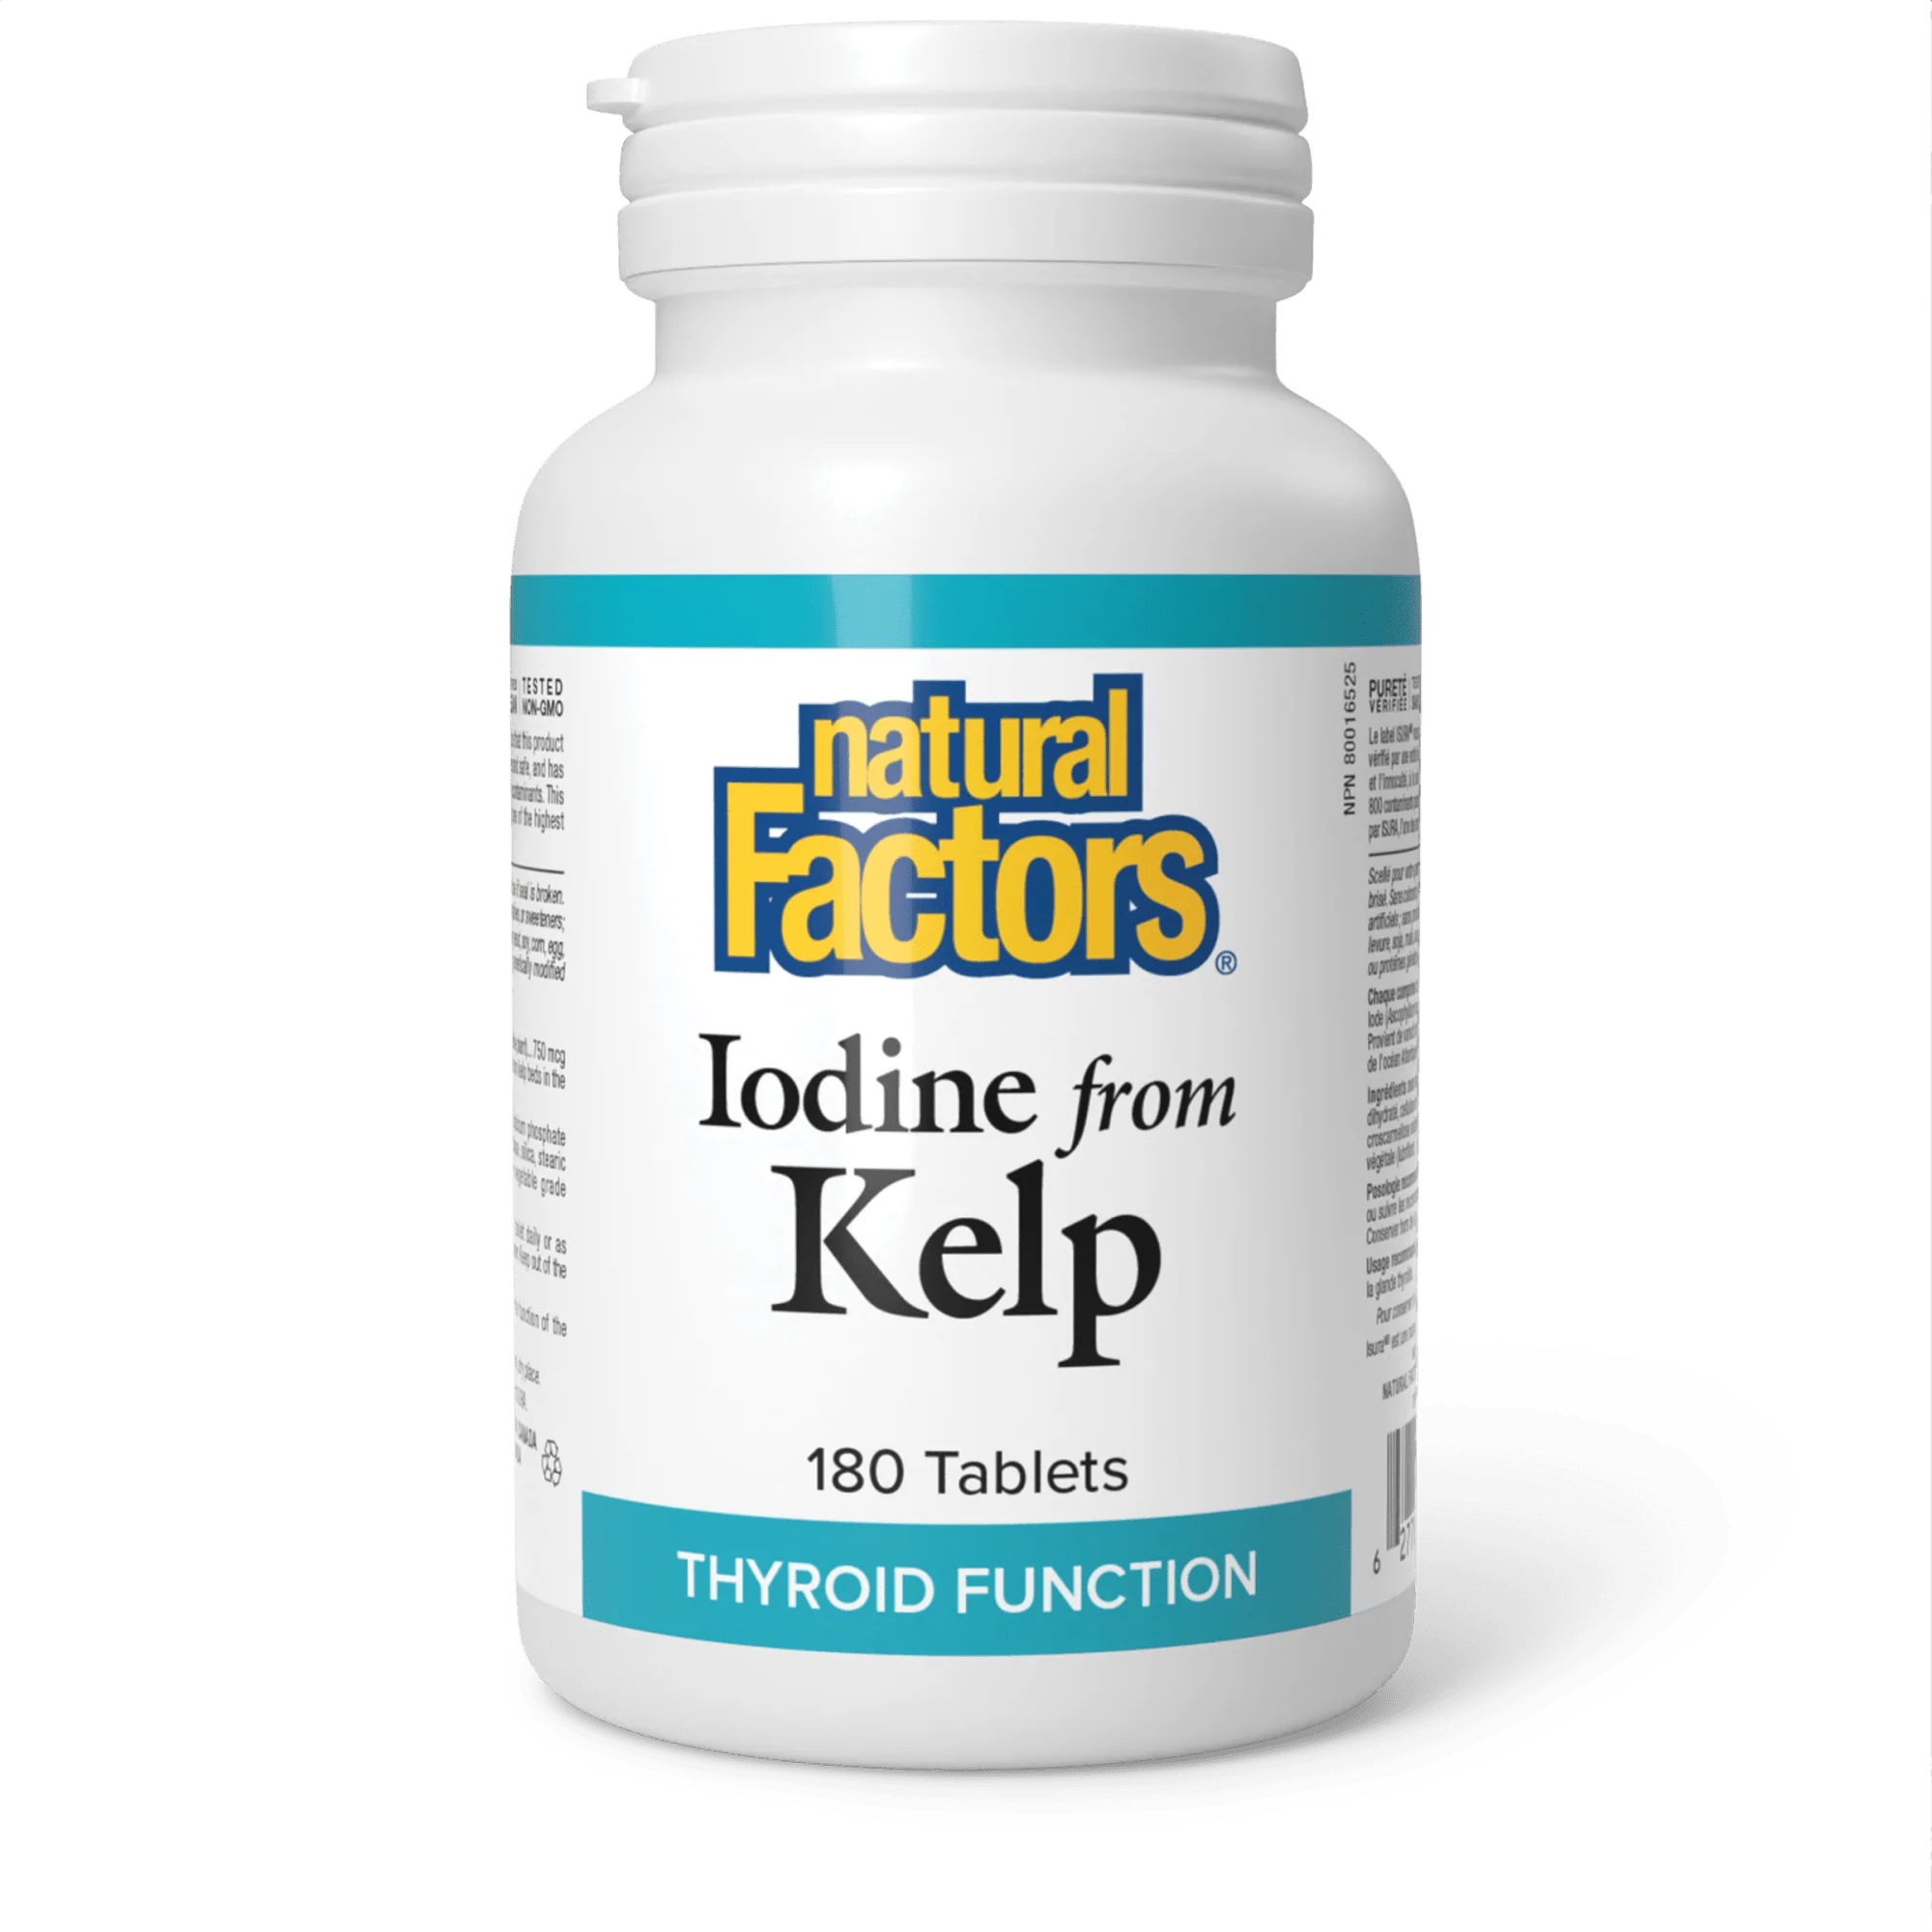 Natural Factors Iodine From Kelp 180 Tablets